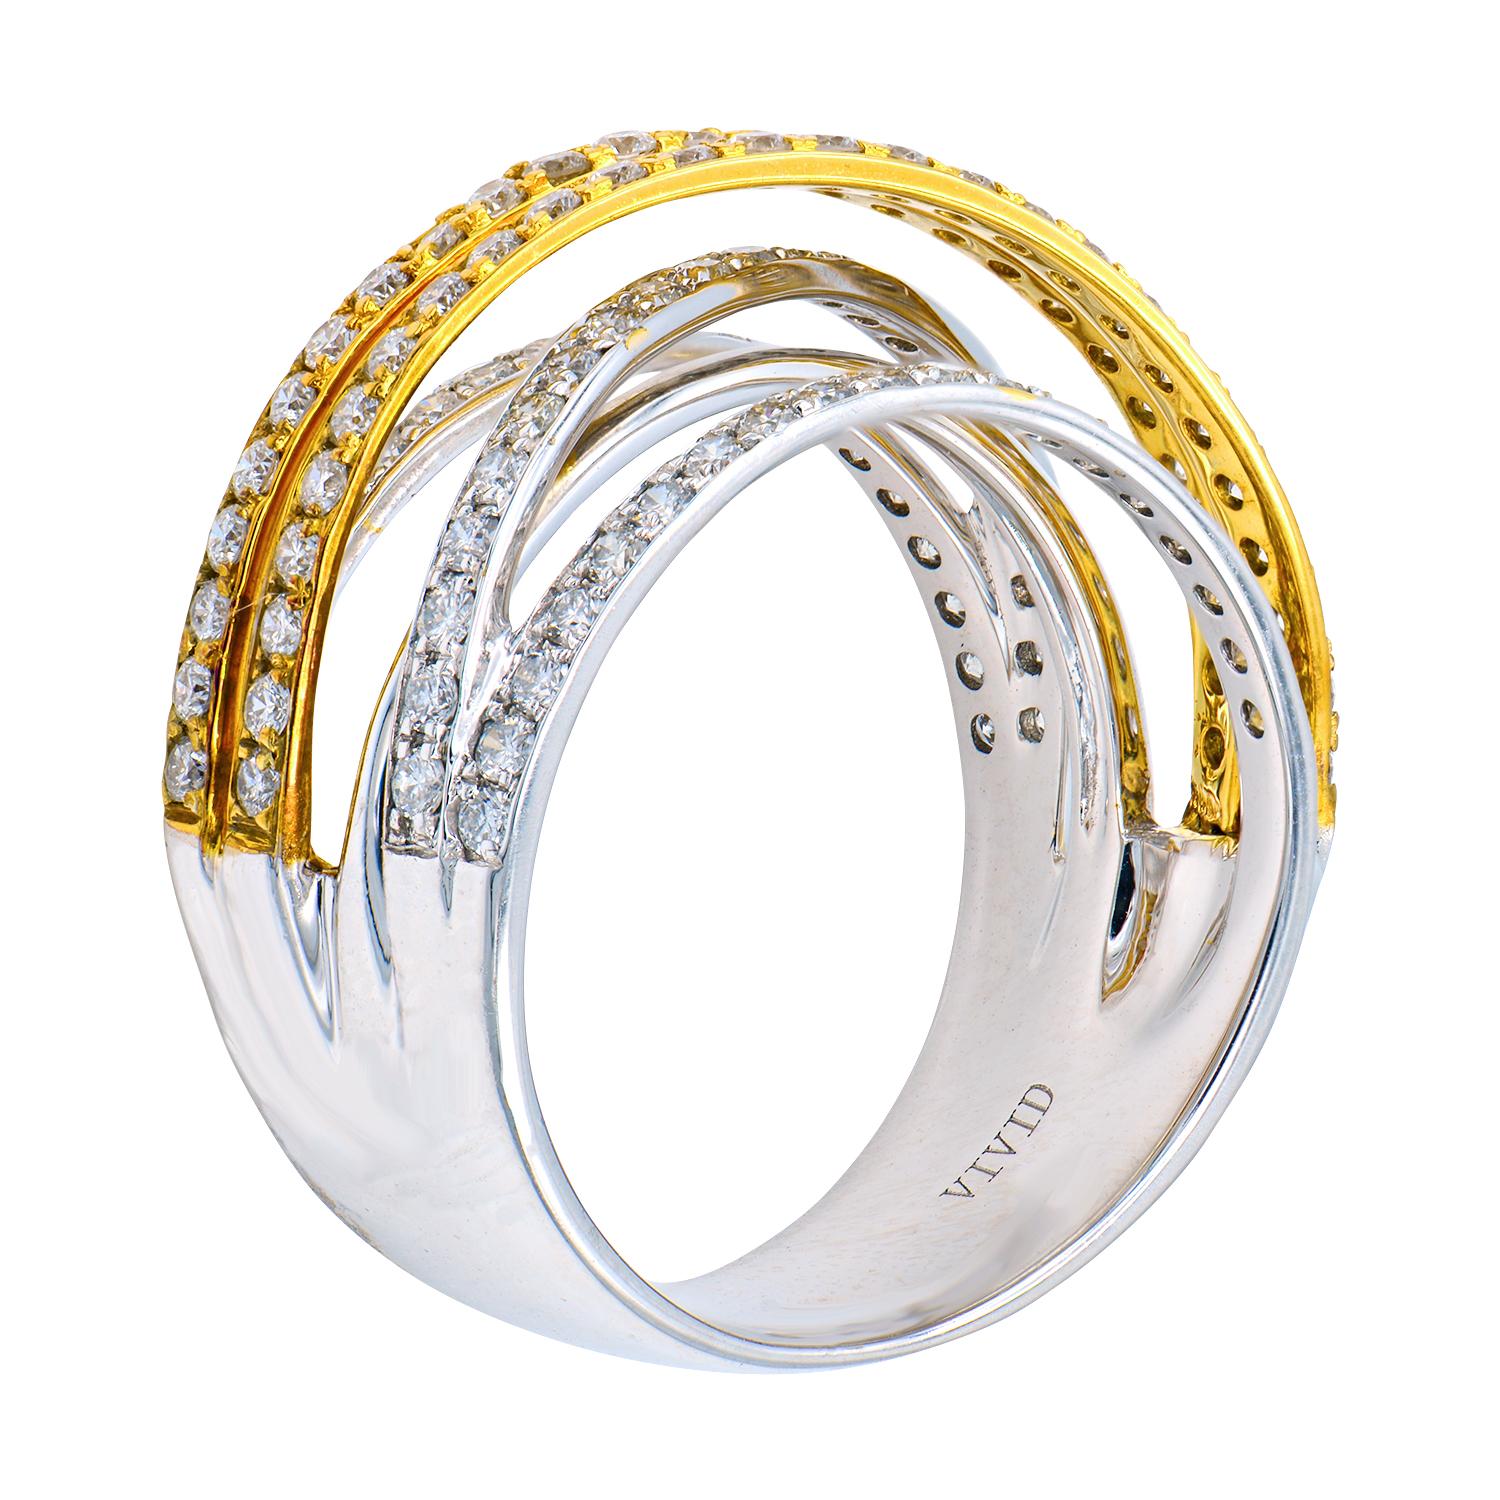 This two toned ring is made from 18 karat white and yellow gold. The bands with yellow gold and diamonds cross on top of the bands with white gold and diamonds. There are 112 round VS2, G color diamonds that total 1 carat which are set in 7.6 grams